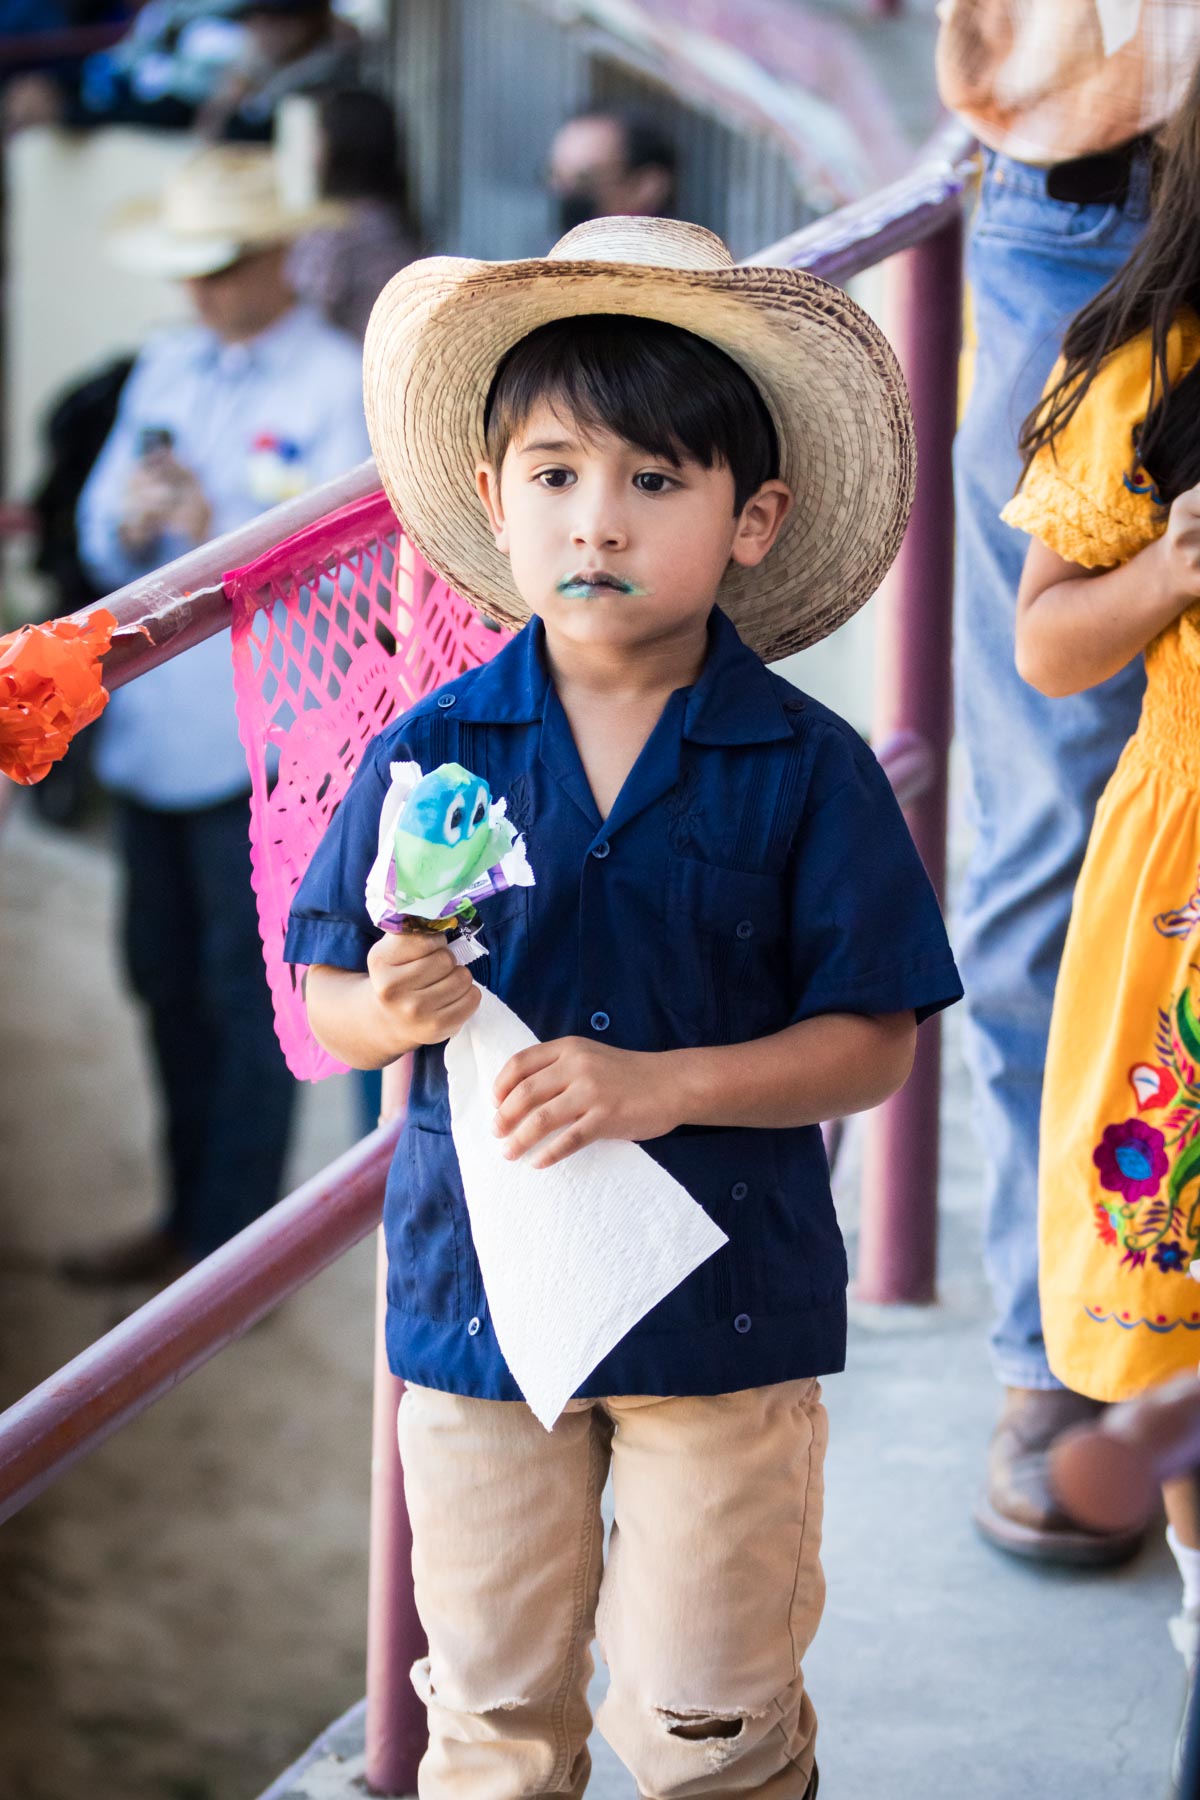 Little boy wearing blue shirt and cowboy hat while holding blue ice cream for an article on the Fiesta photo tips